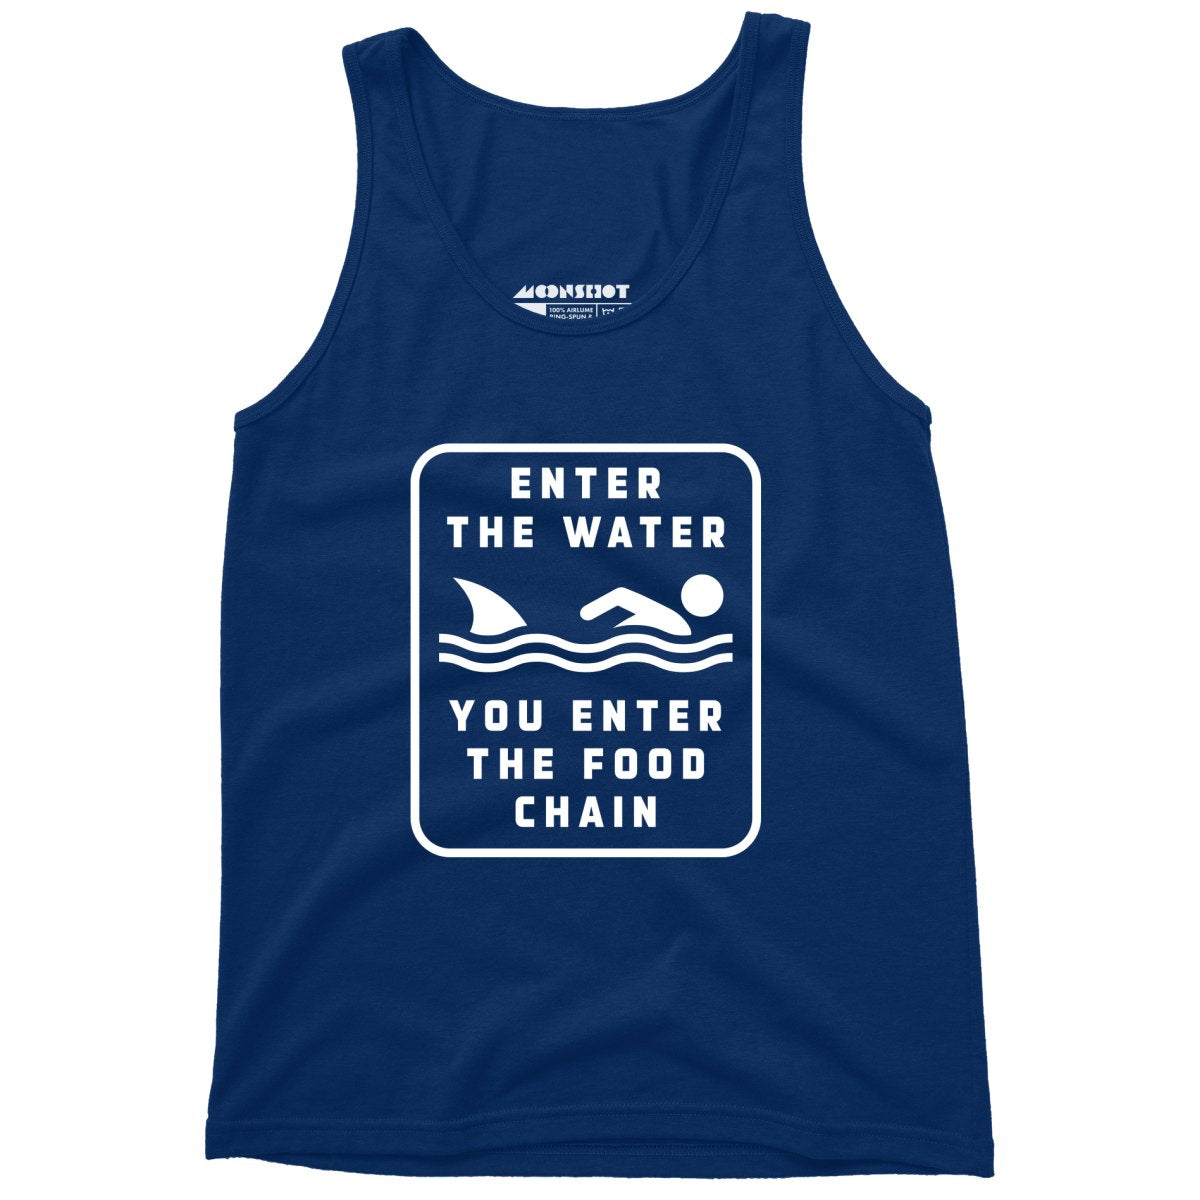 Enter the Water You Enter the Food Chain - Unisex Tank Top